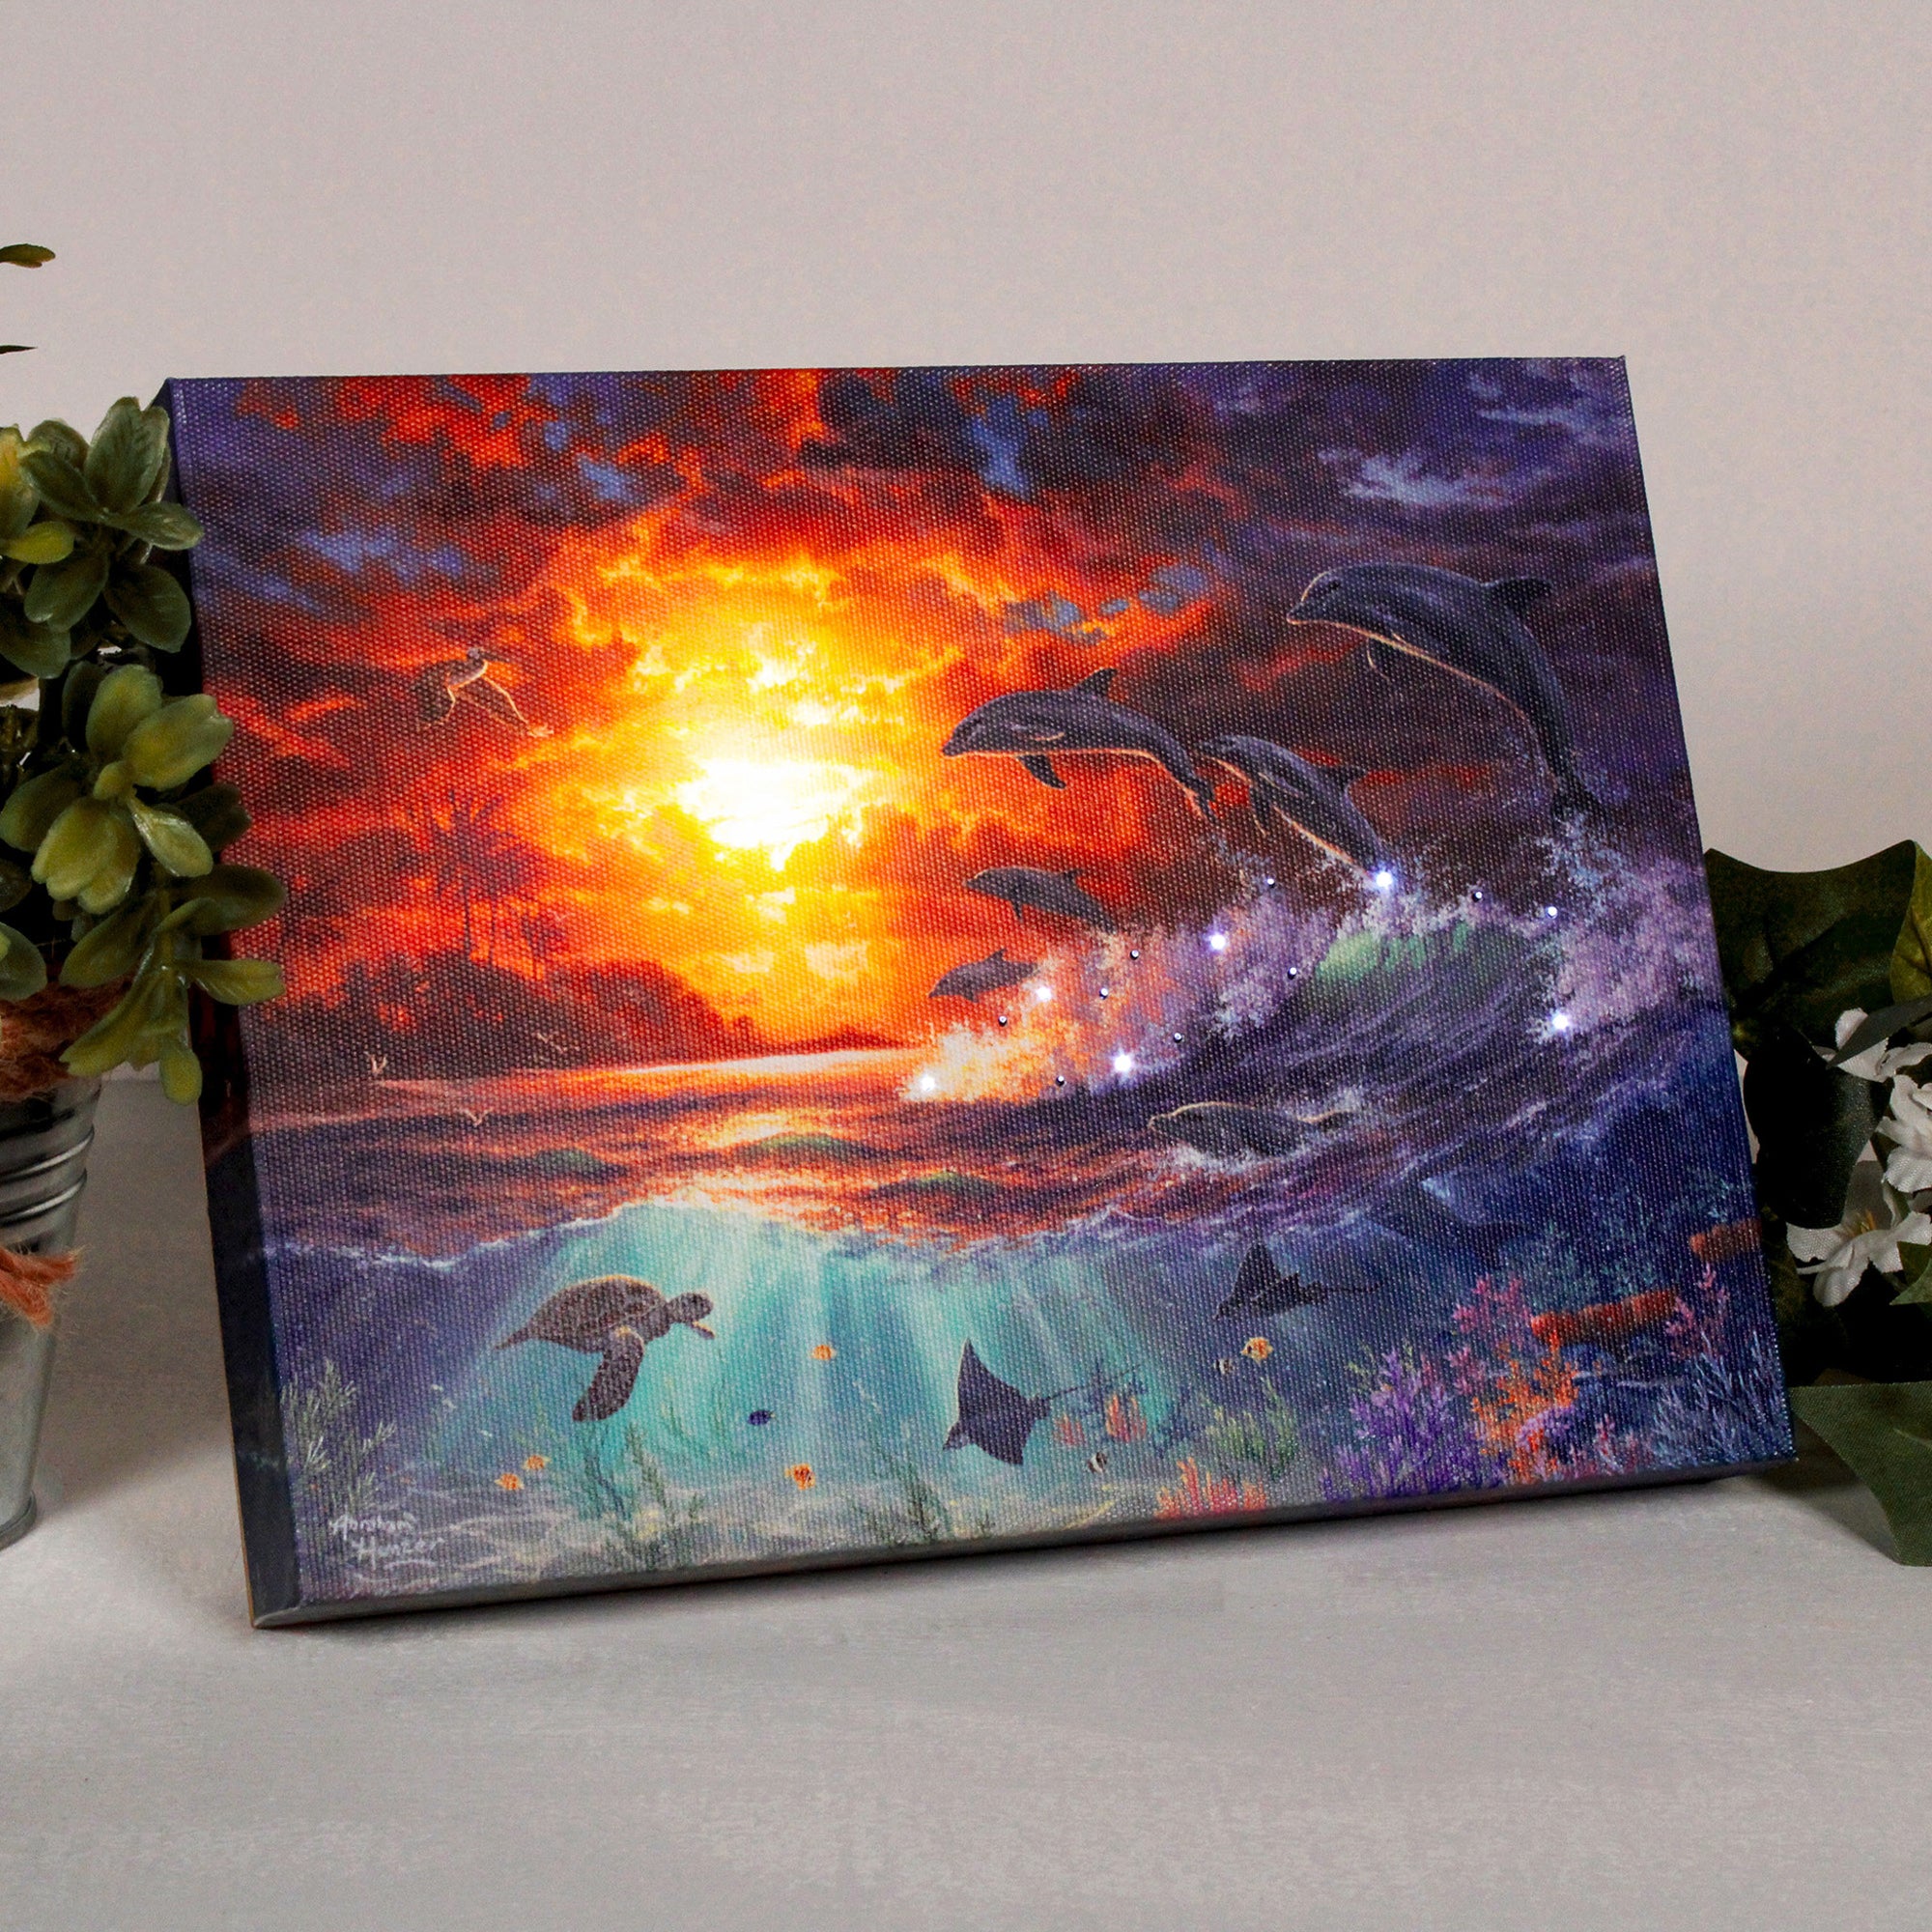 Beyond the Shore 8x6 Lighted Tabletop Canvas